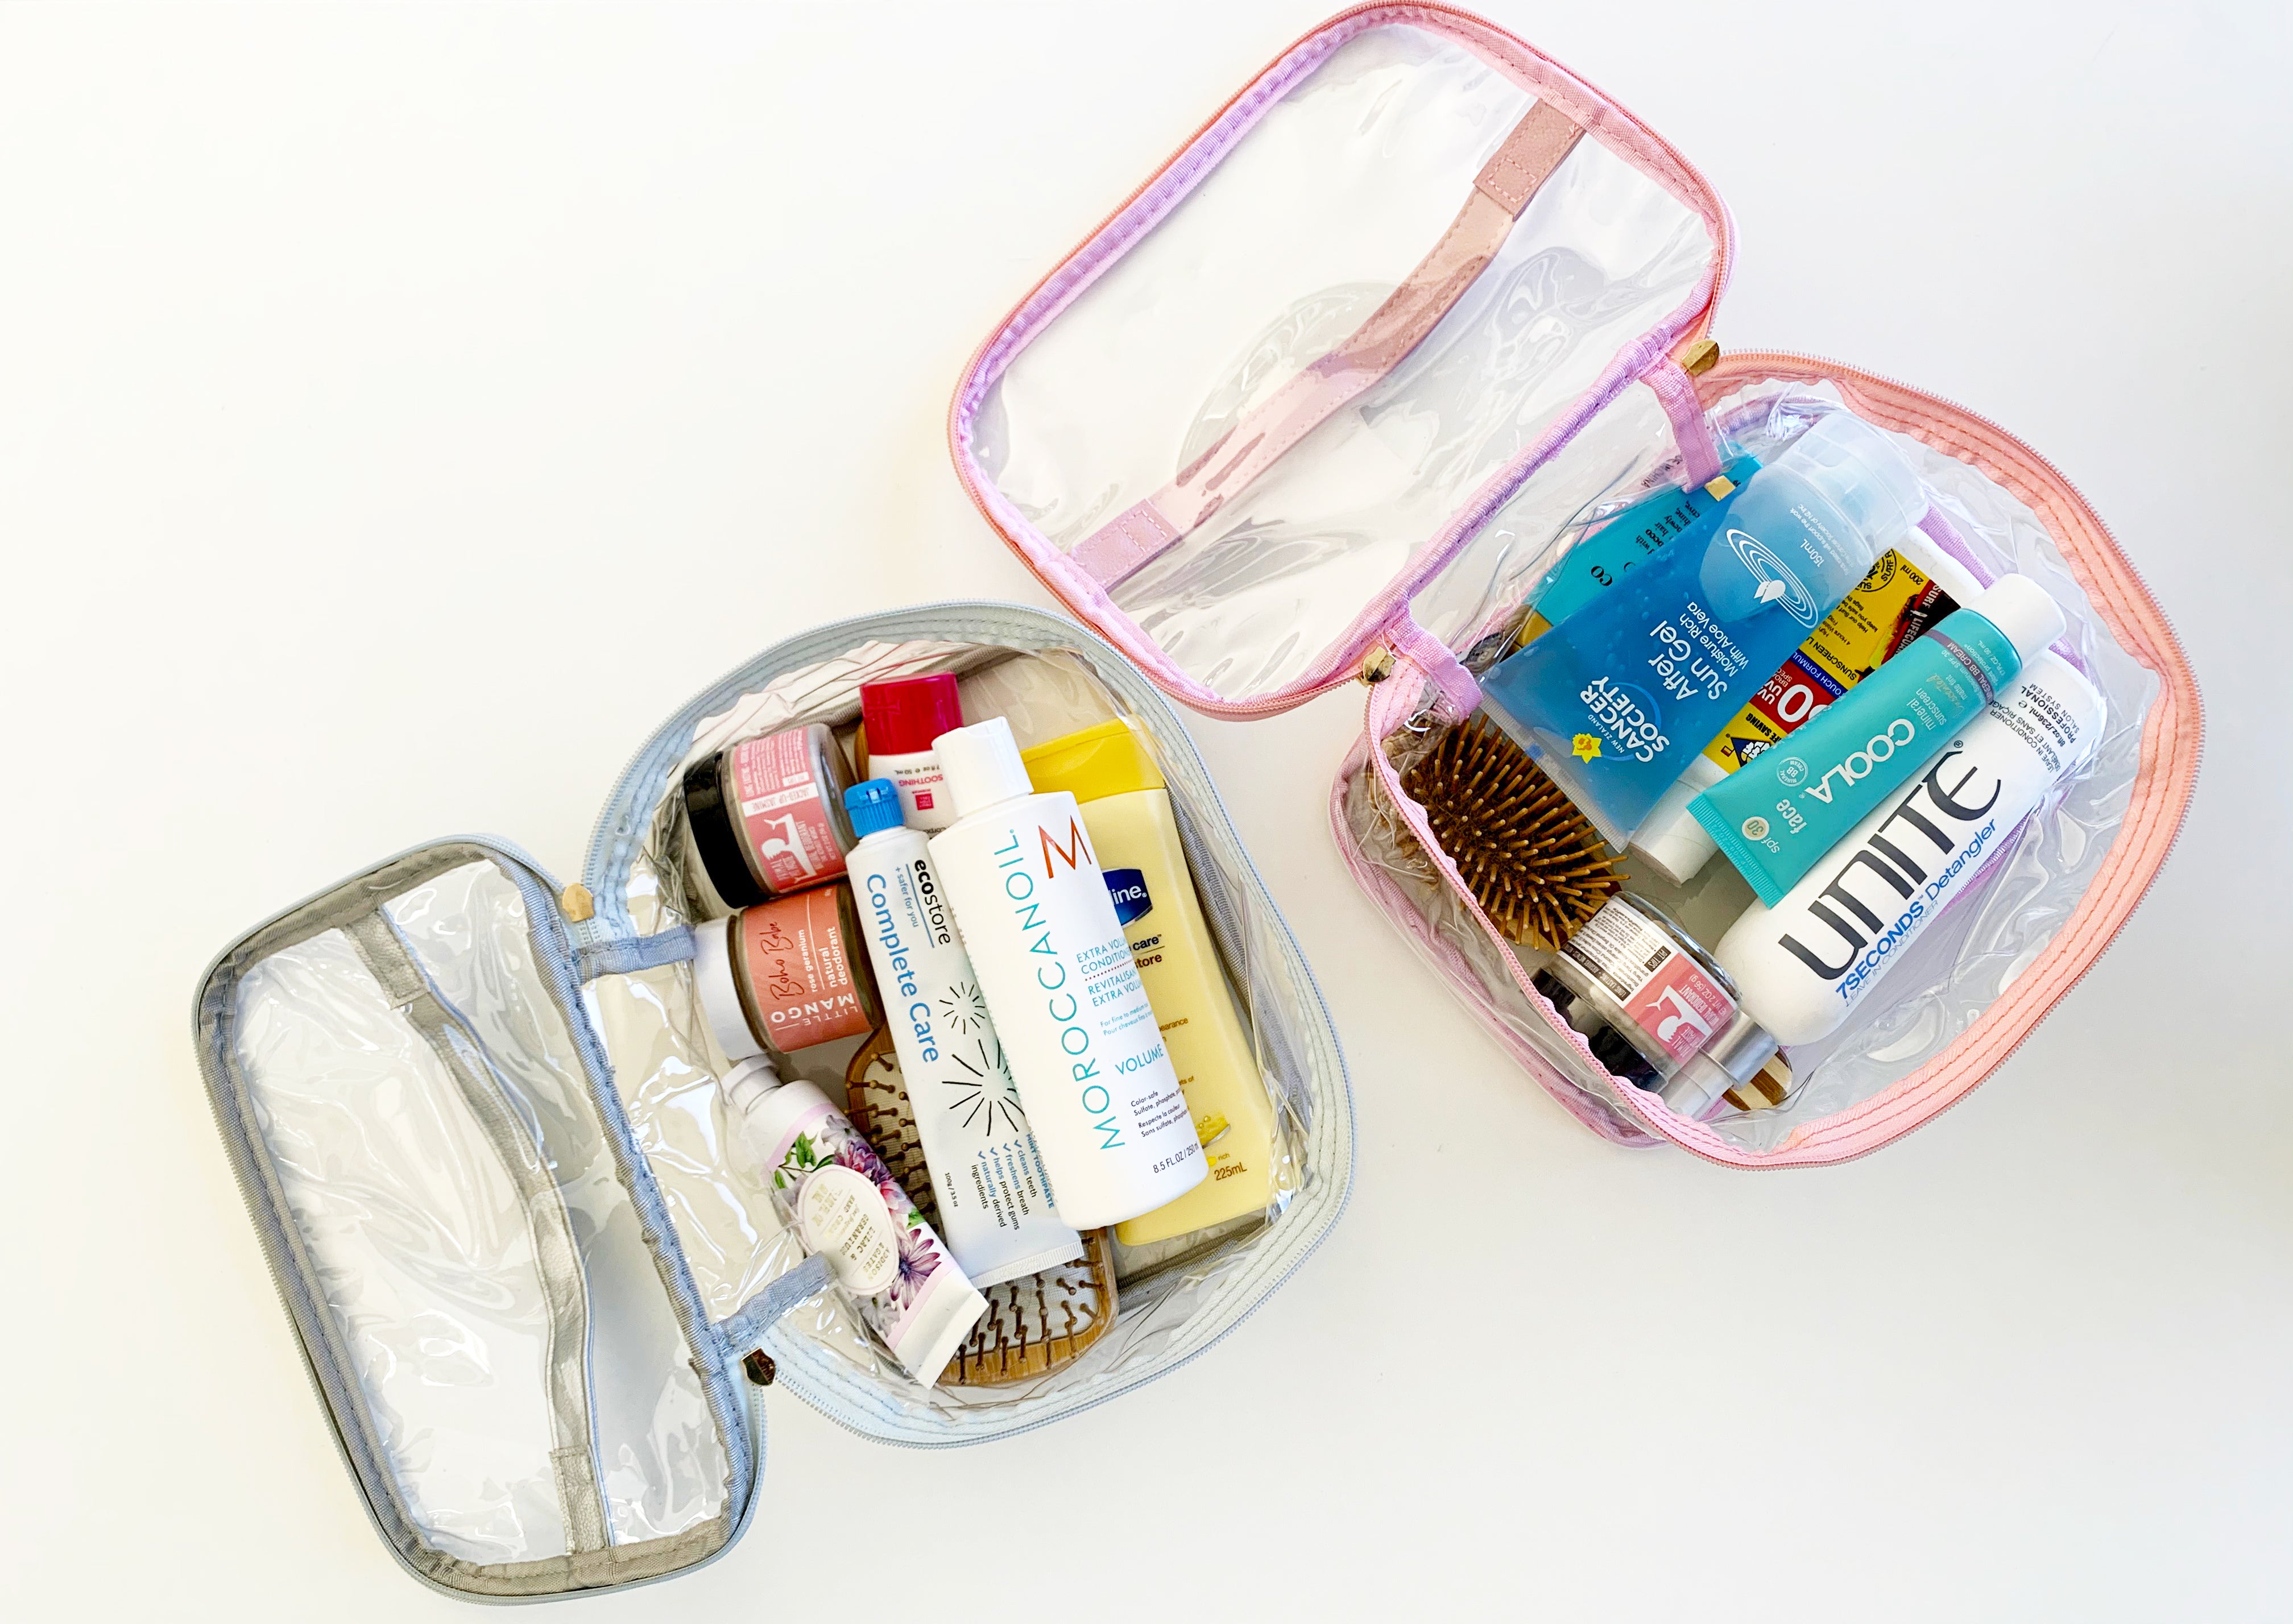 Large clear toiletry bags for traveling